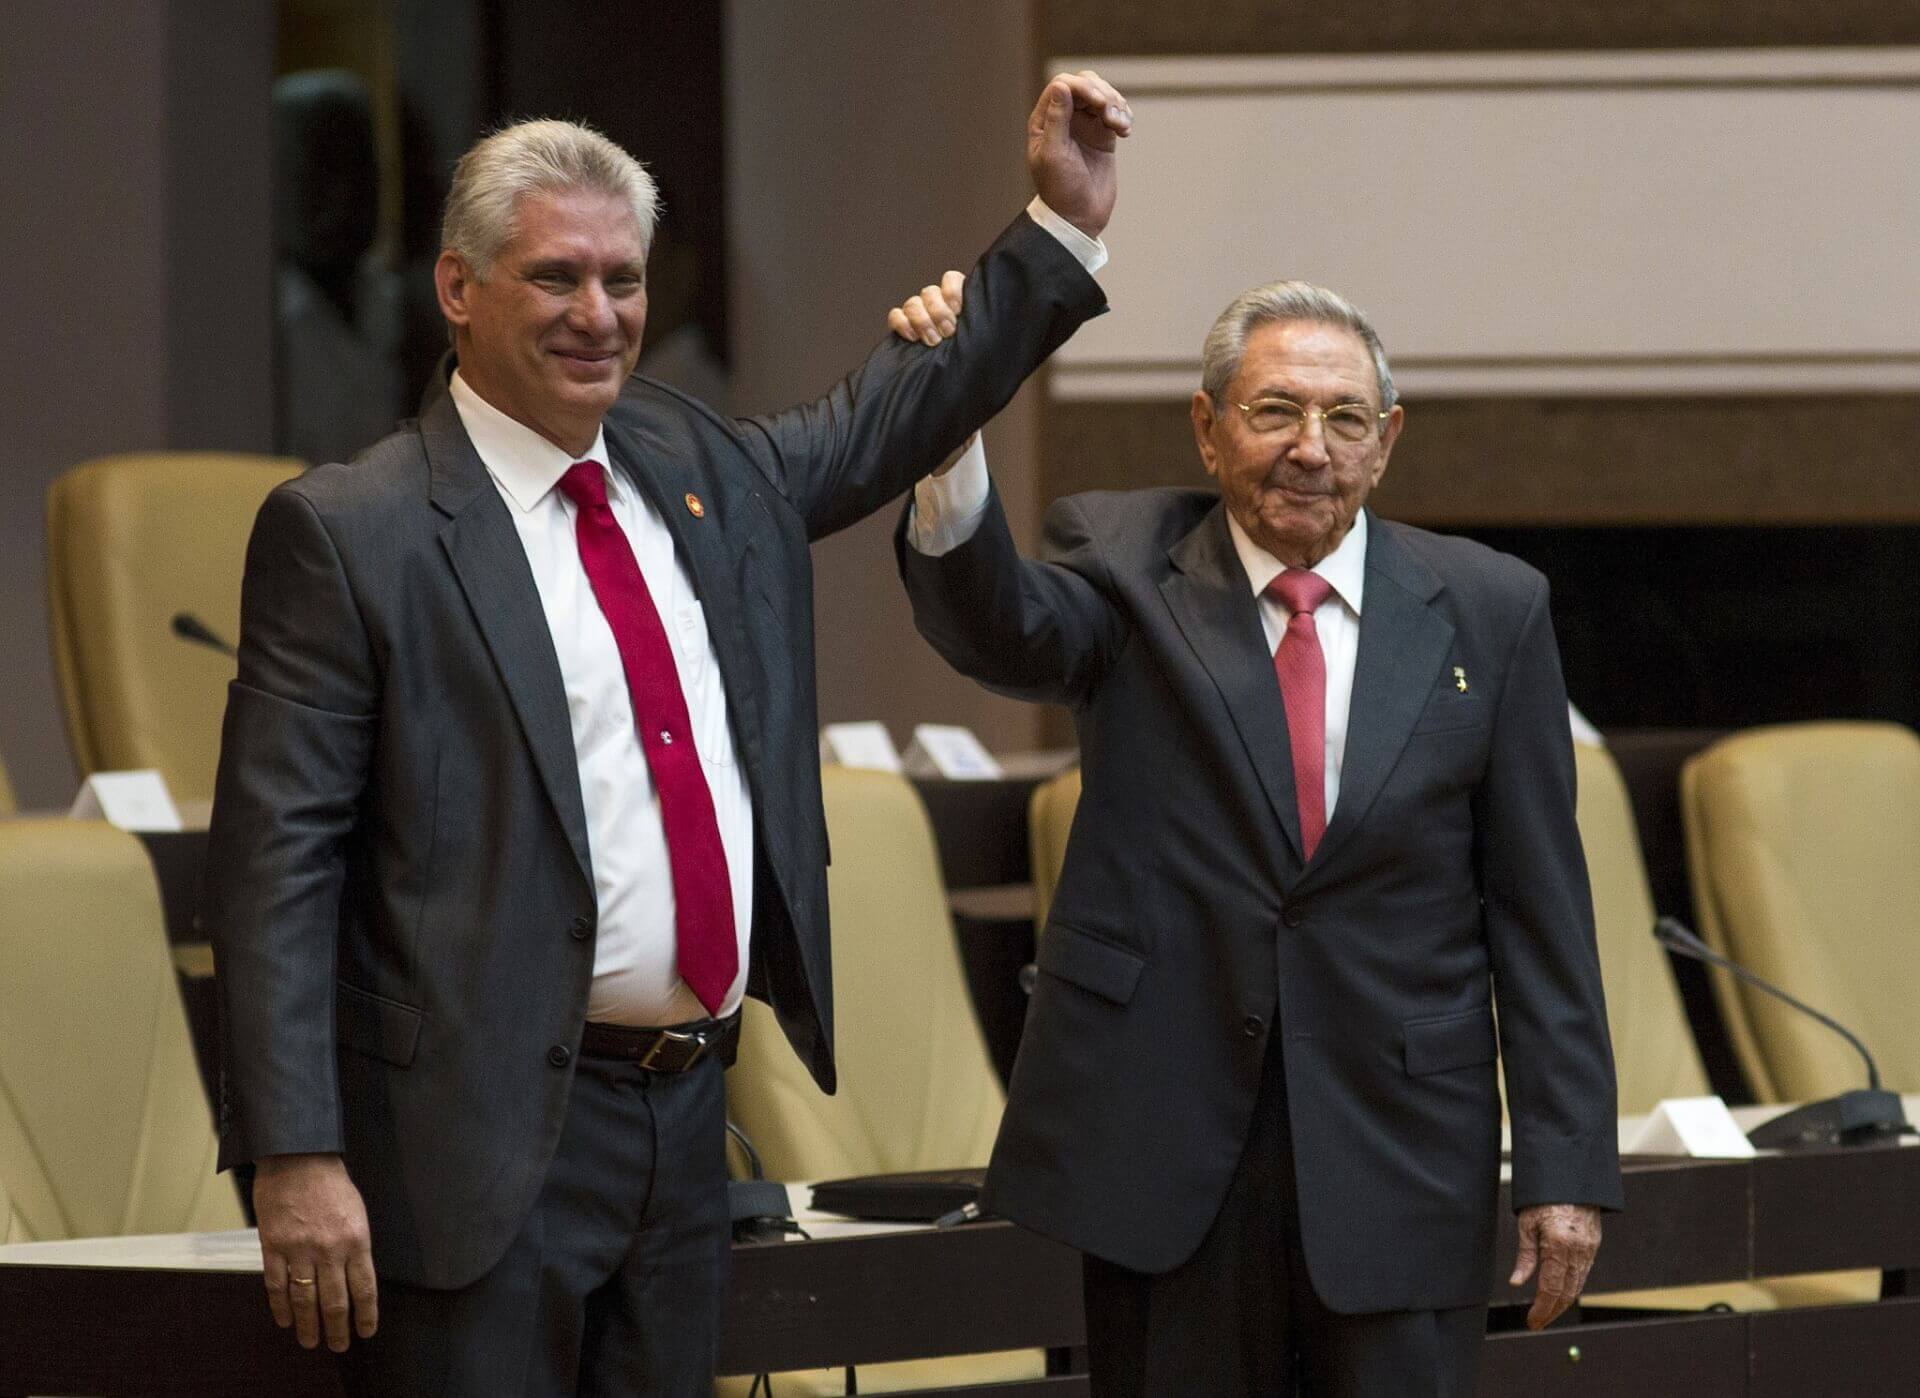 Pres. Díaz-Canel’s Appointment as Leader of Cuba’s Communist Party Marks End of Castro Era